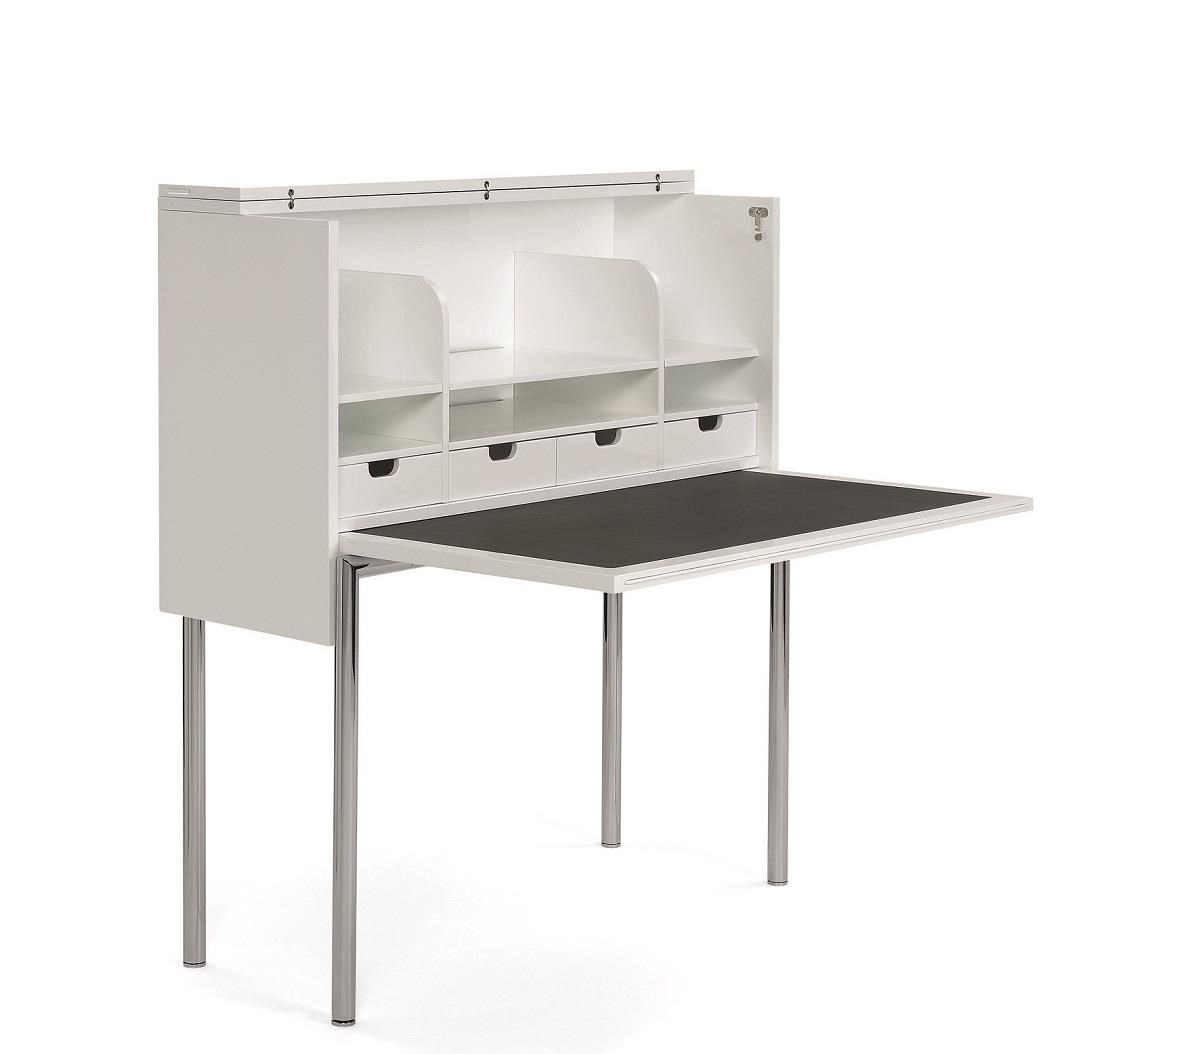 Classicon Grcic Orcus Desk 1200